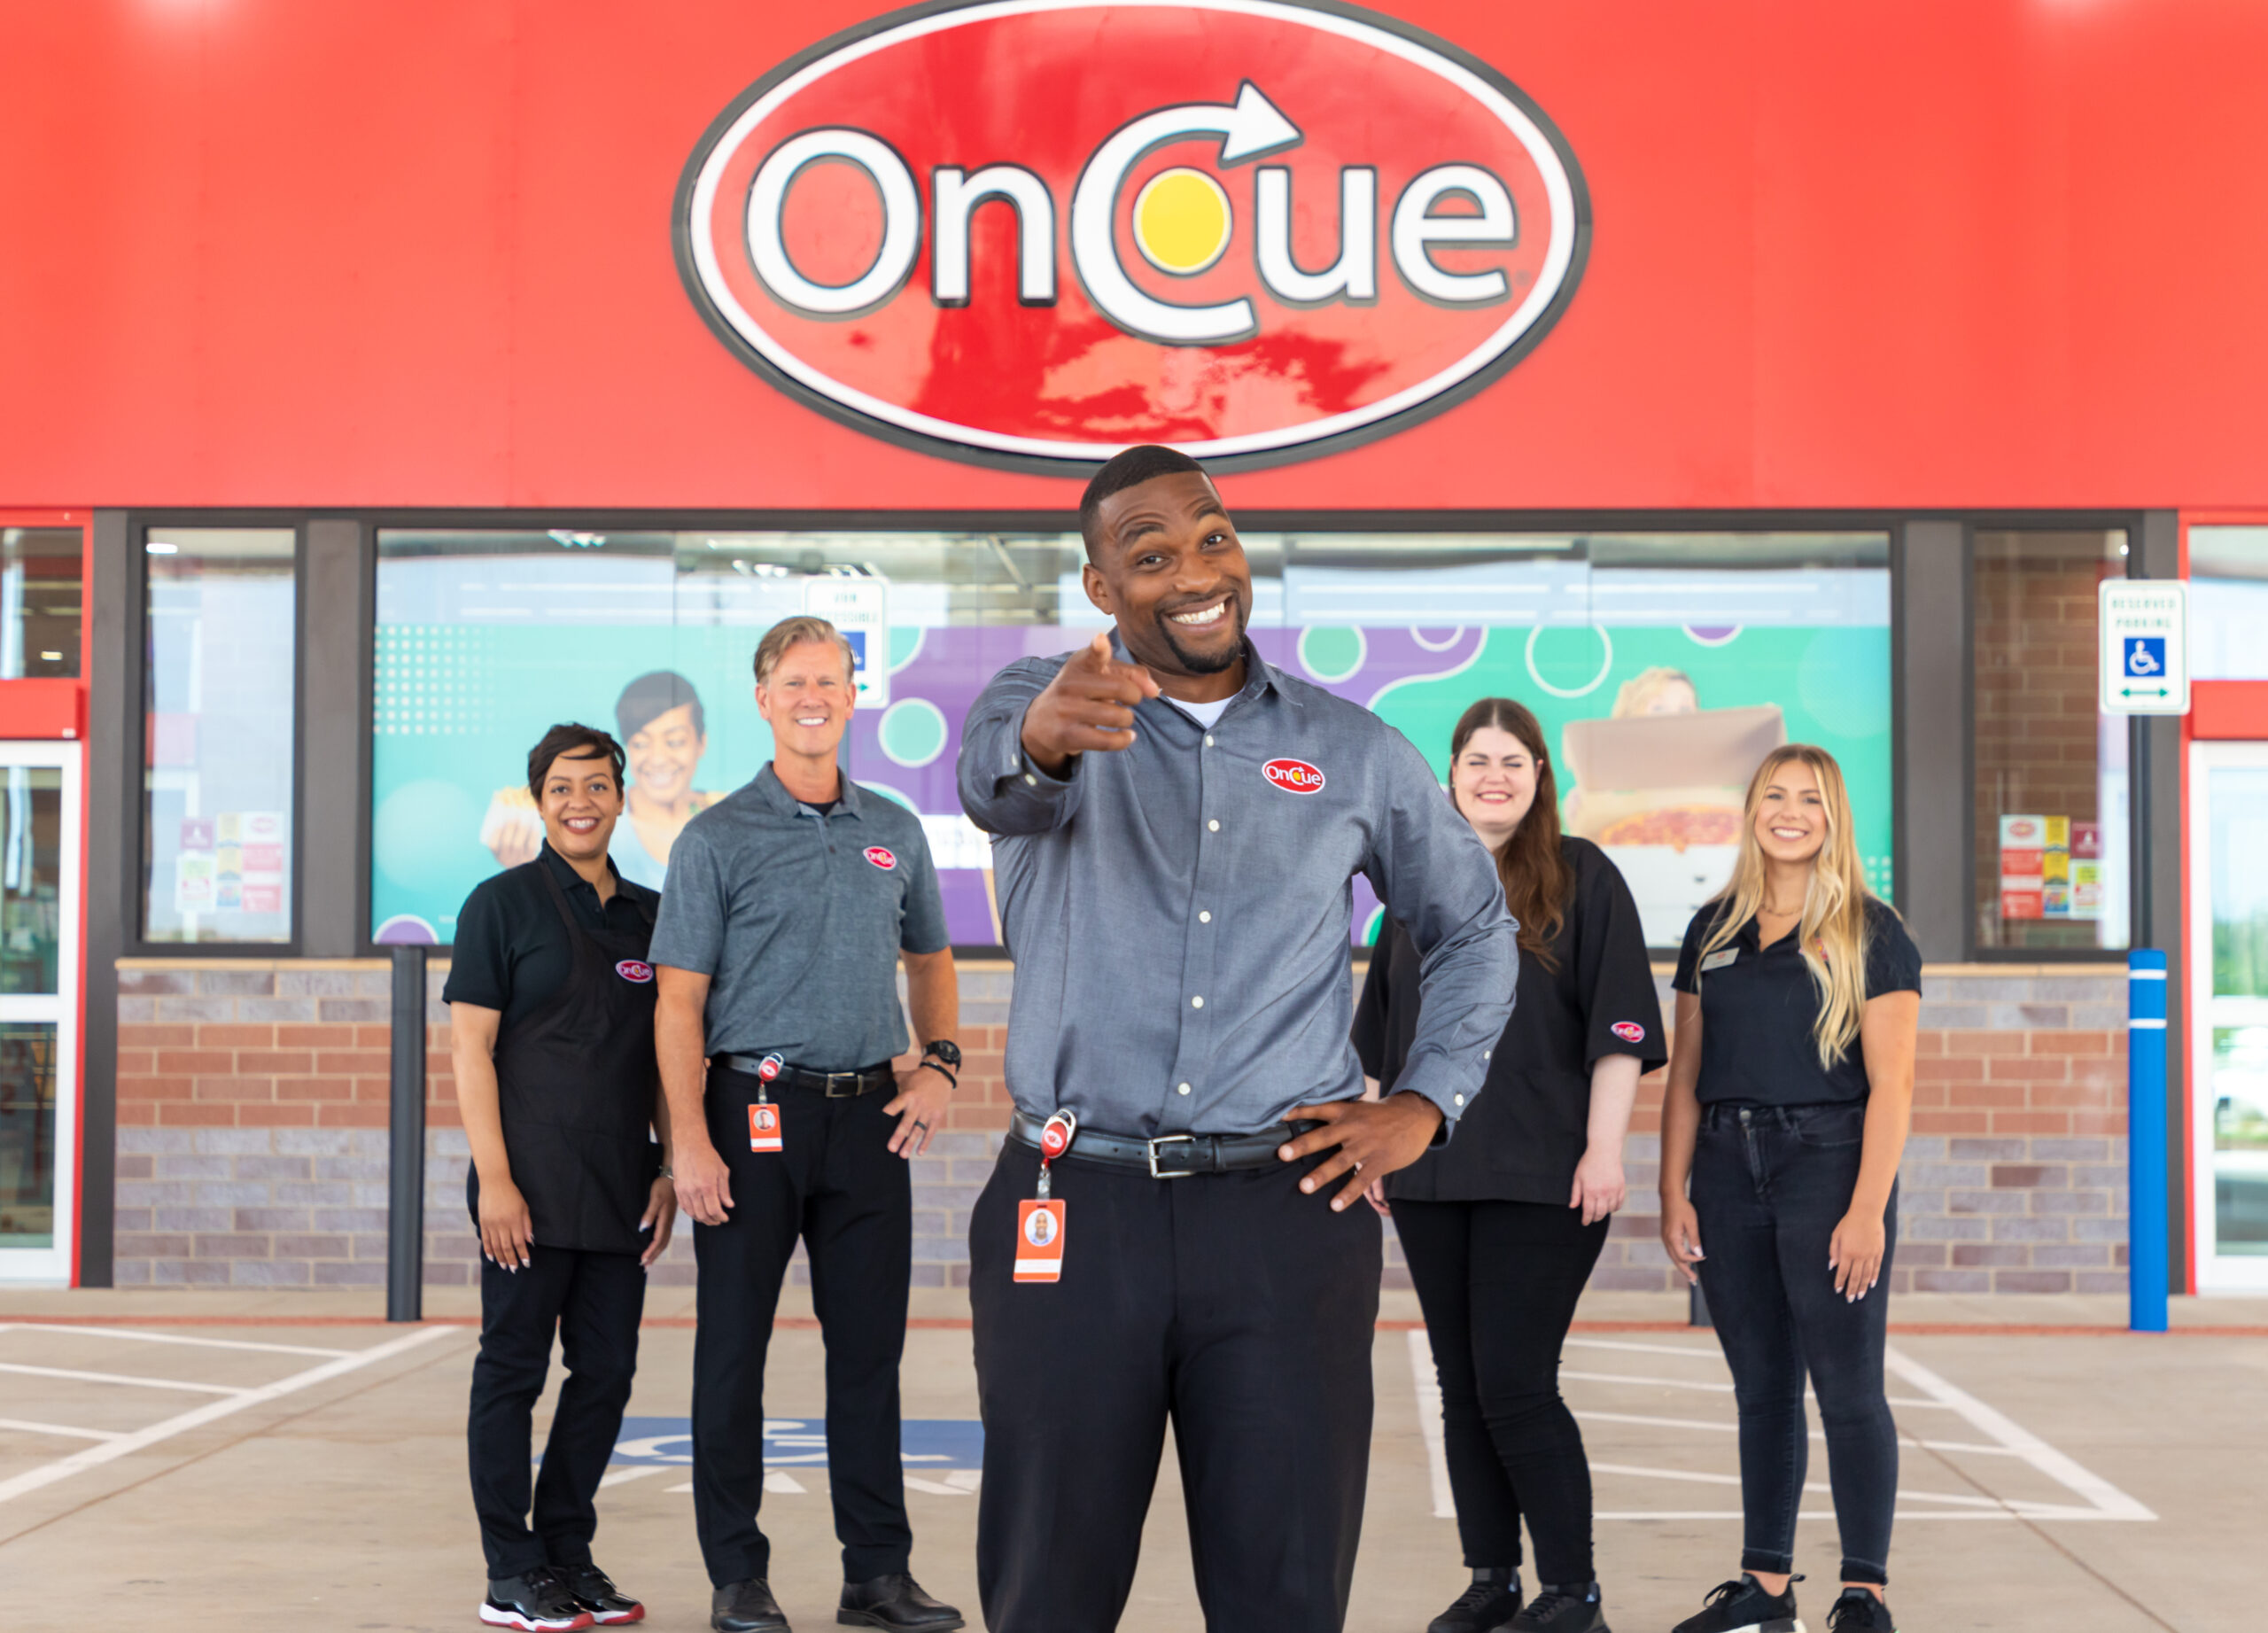 OnCue team member pose for recruitment images as they share their experiences with the company.